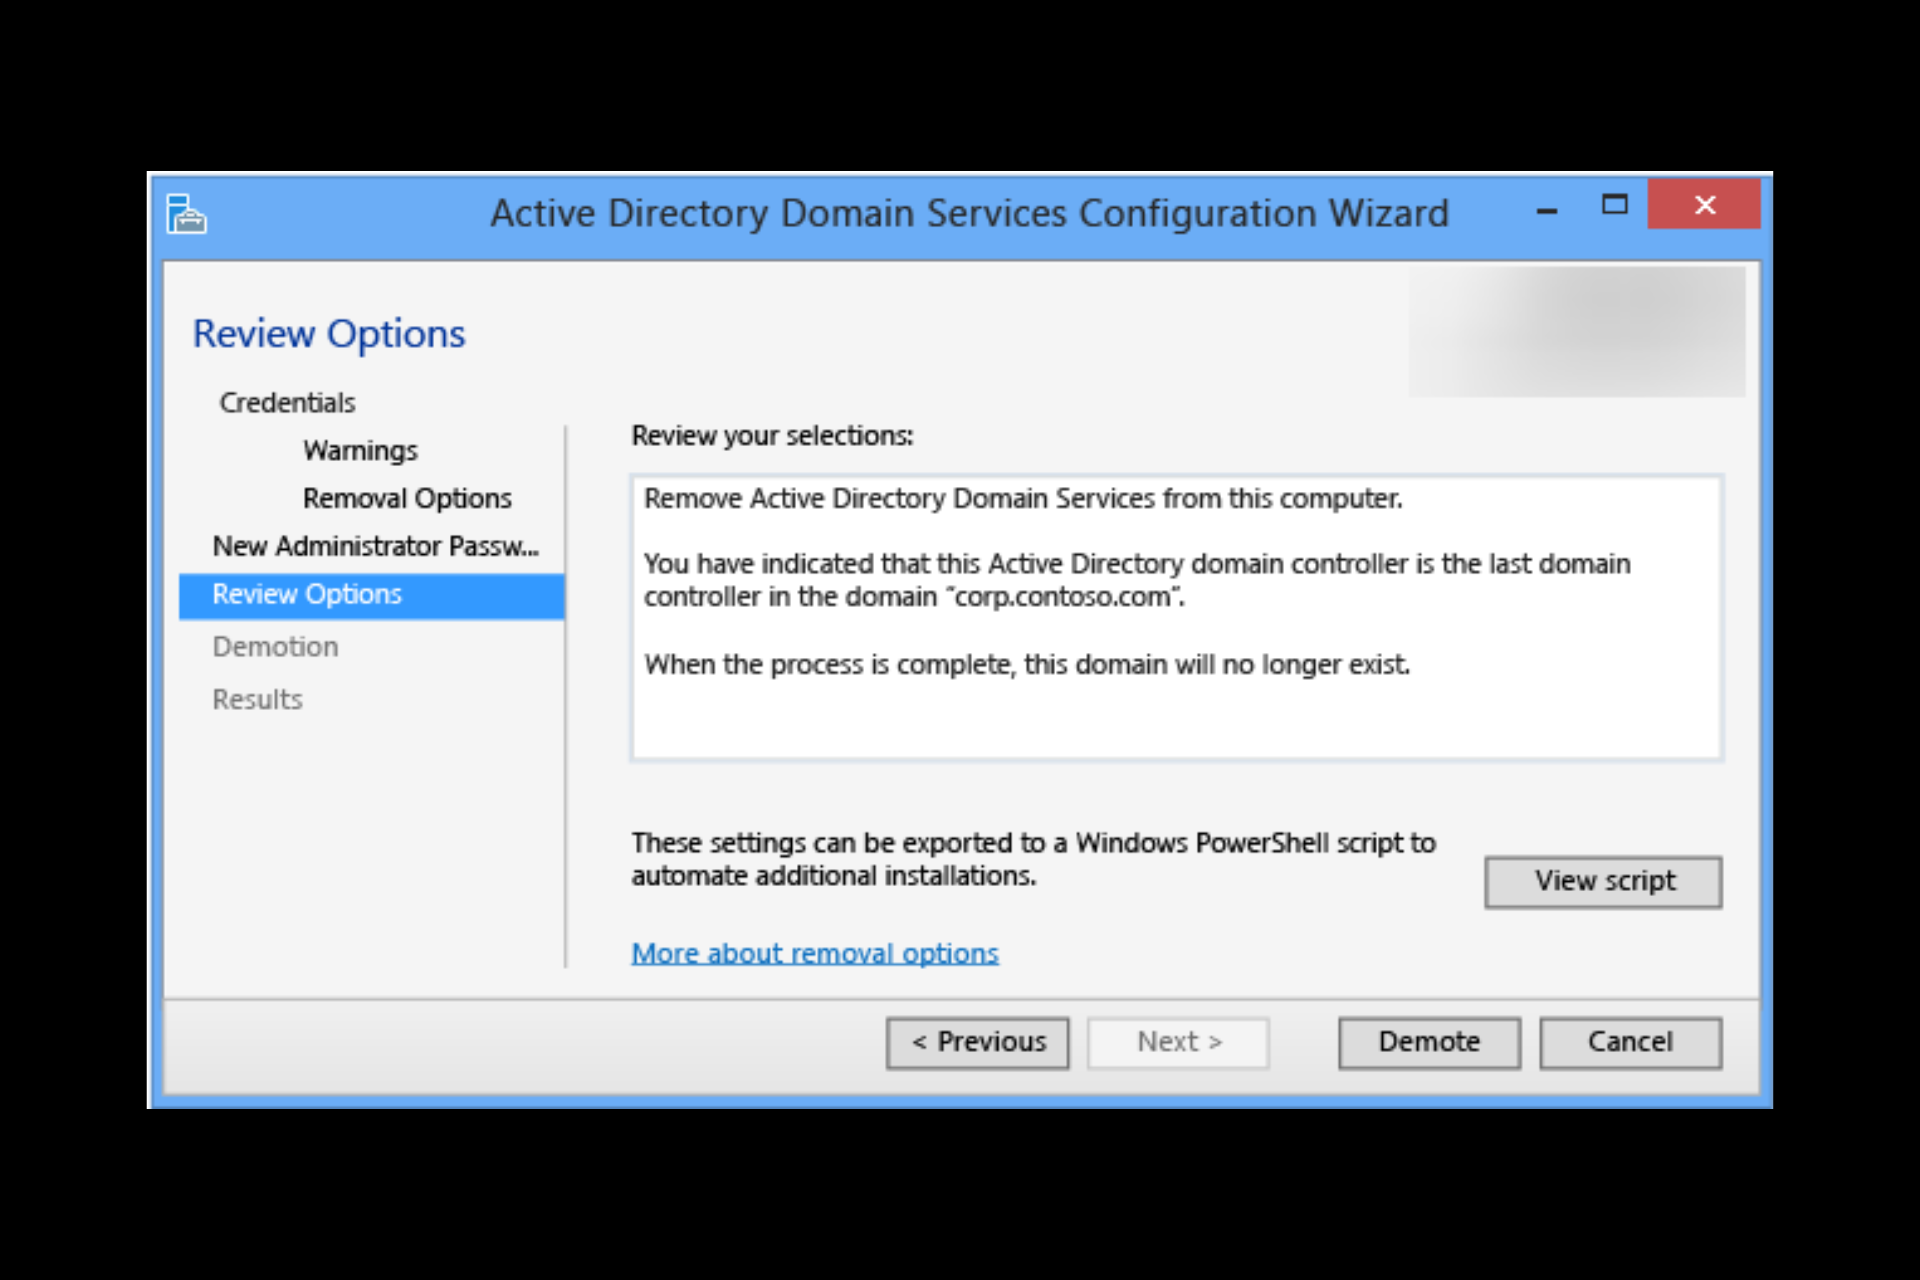 How to Demote A Domain Controller on Windows Server